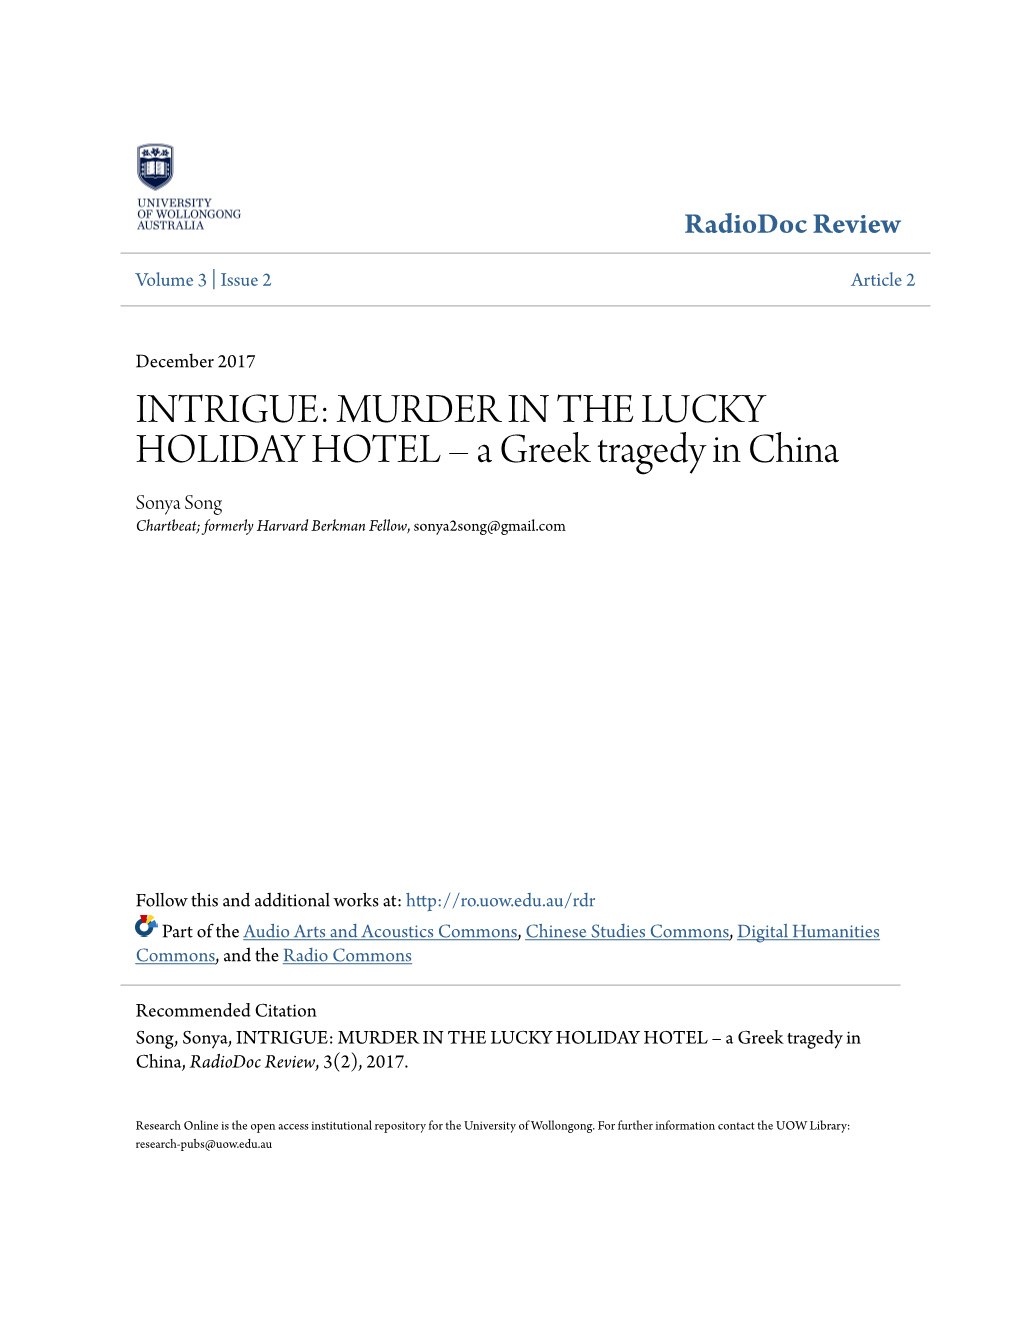 MURDER in the LUCKY HOLIDAY HOTEL – a Greek Tragedy in China Sonya Song Chartbeat; Formerly Harvard Berkman Fellow, Sonya2song@Gmail.Com